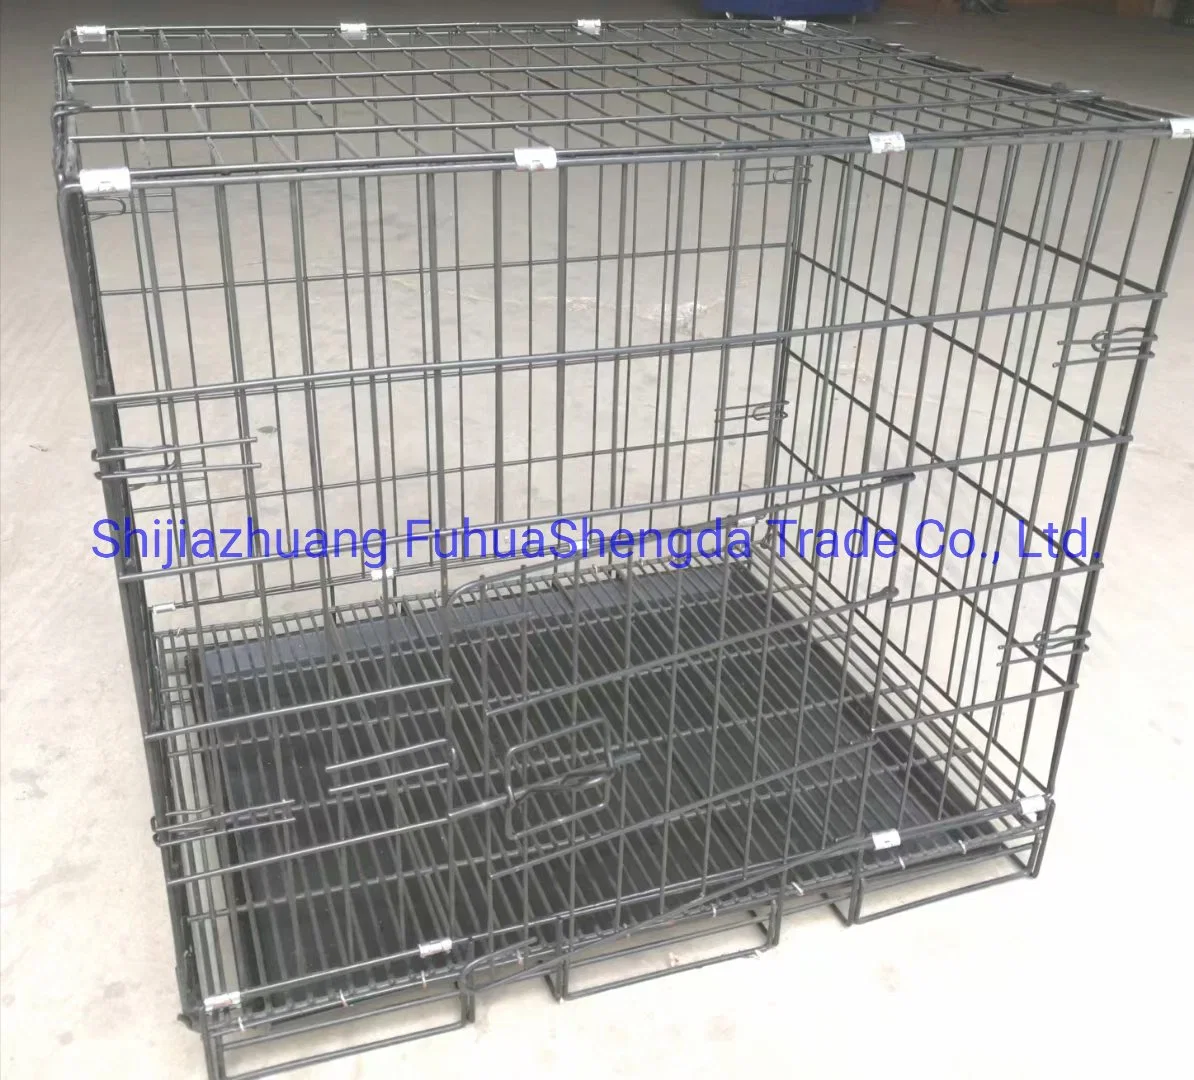 Stackable Stainless Steel Pet Dog, Crate Foldable Dog Cage